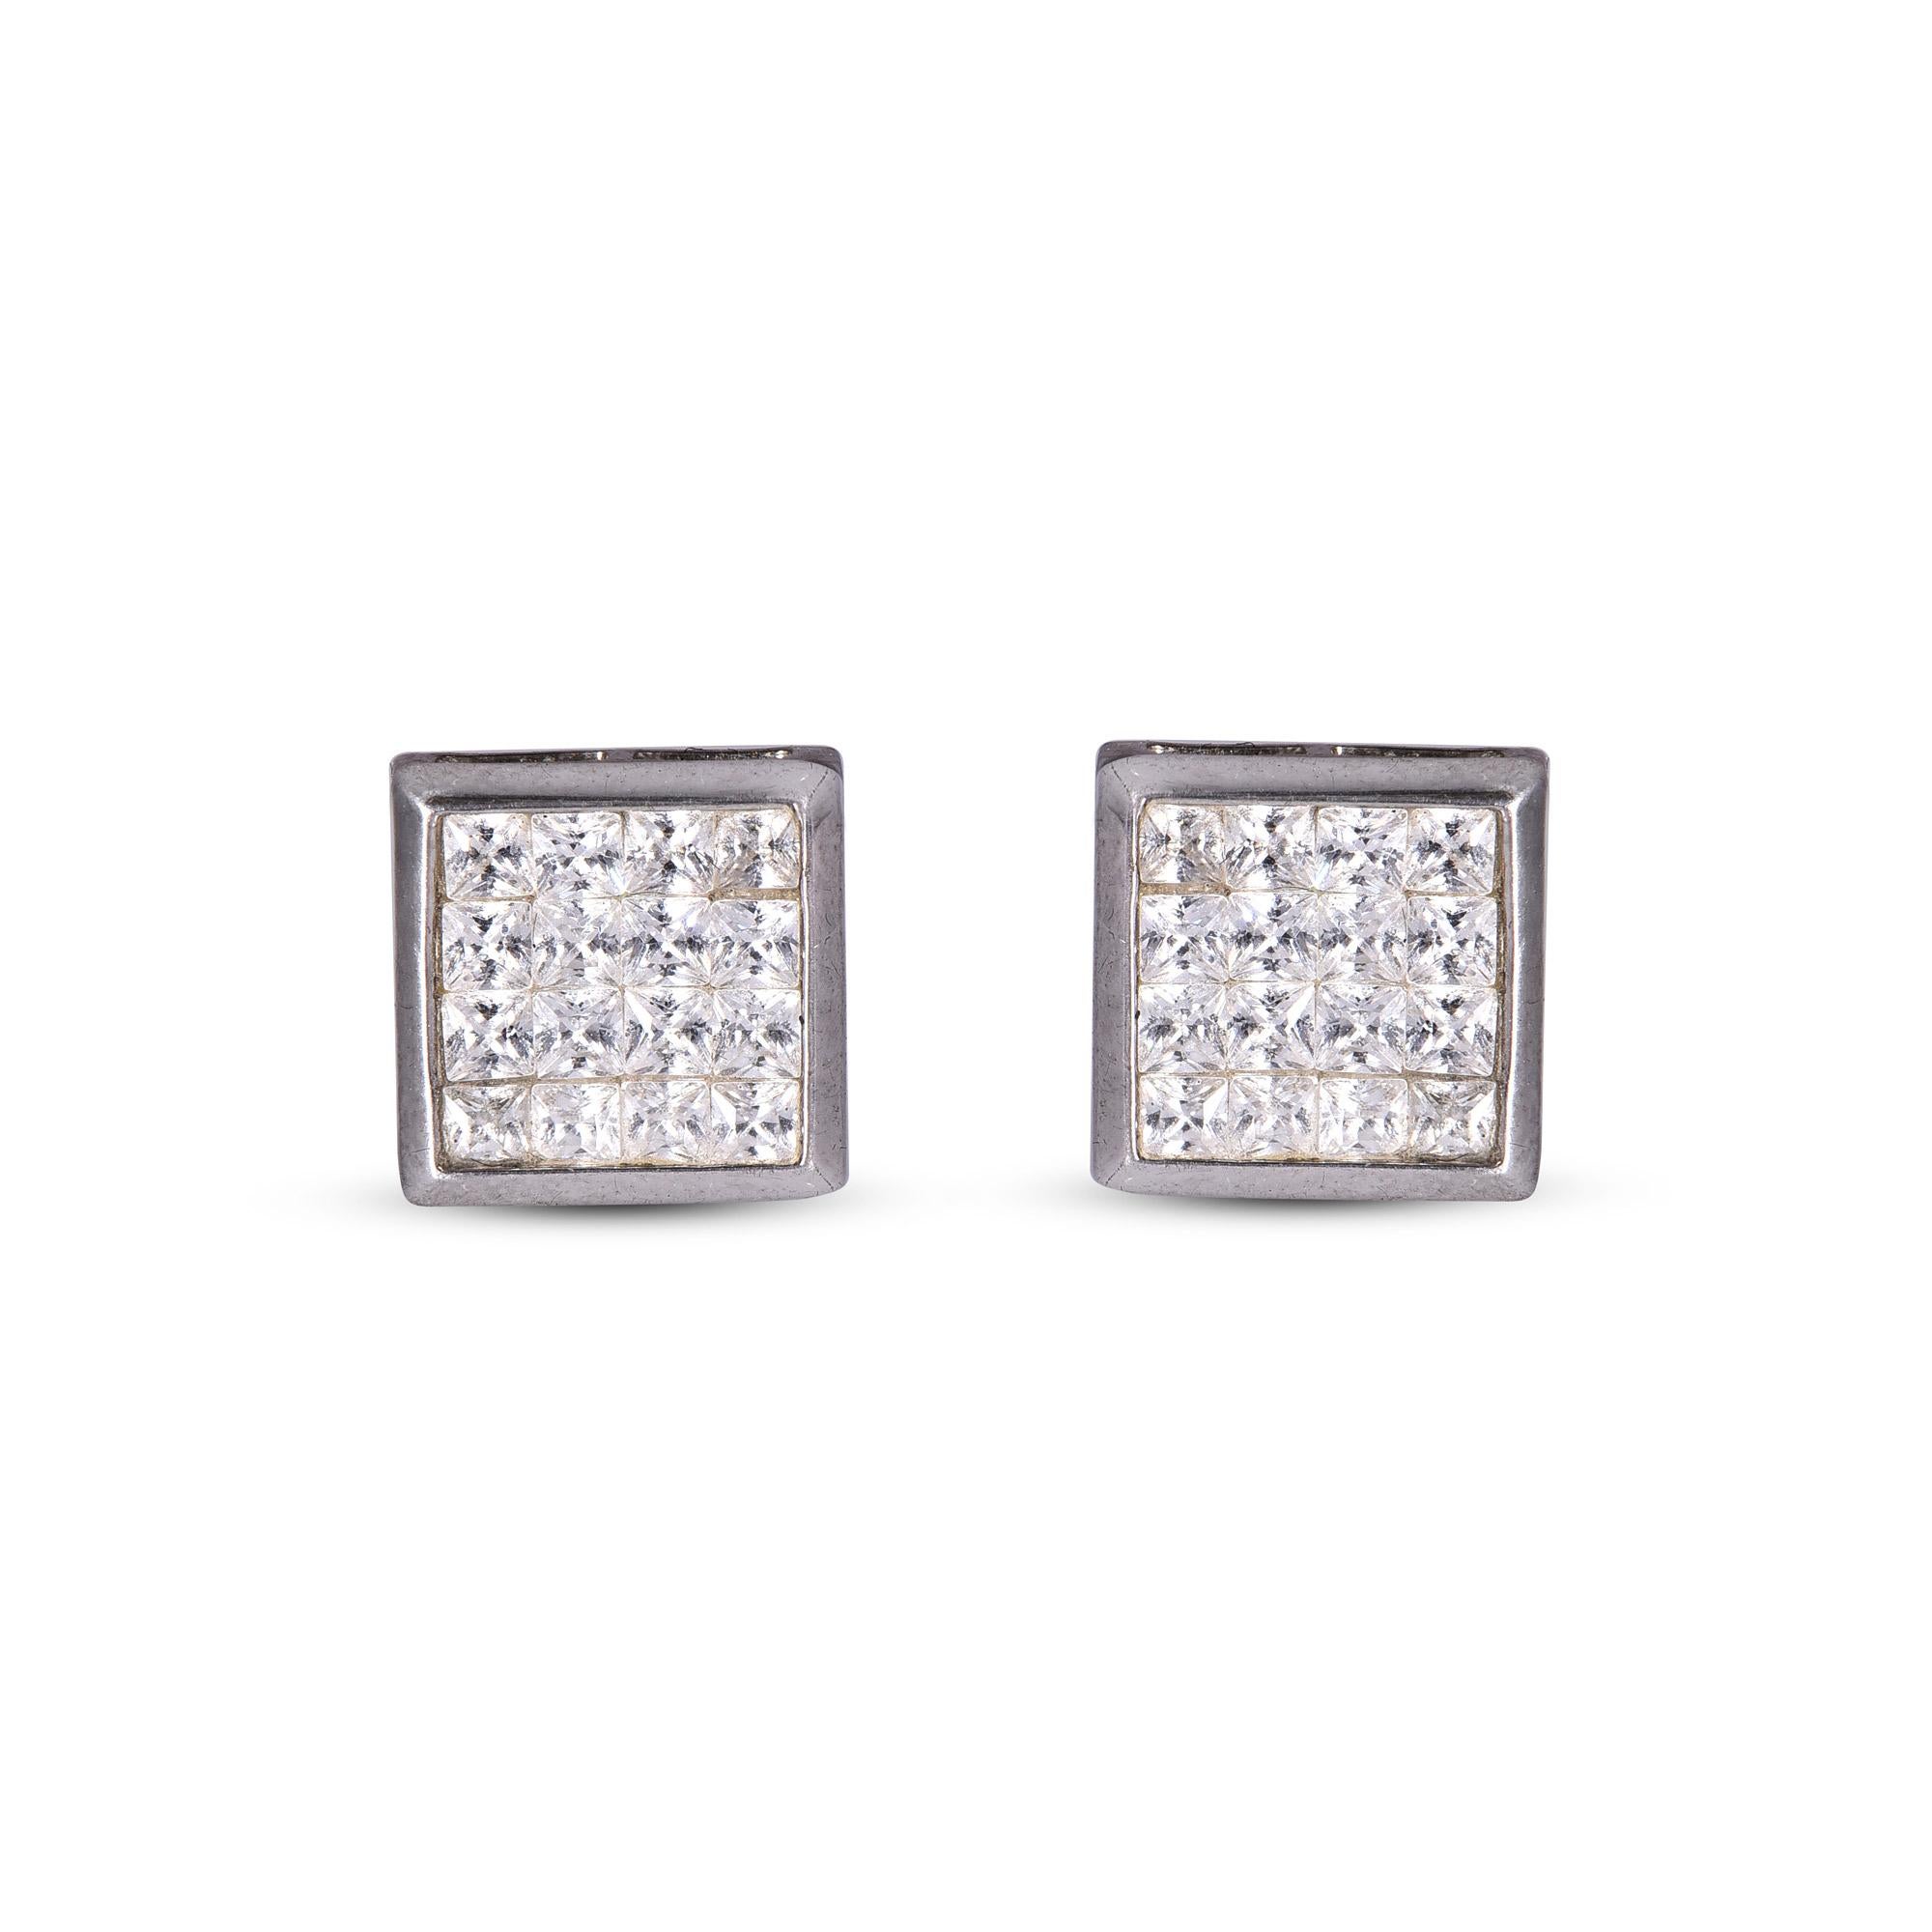 Expertly crafted in 18K solid white gold, both square frame shaped earring is cleverly filled with 32 round-cut diamond set in invisible setting, shines with H-I color SI1-2 clarity. Captivating with 1.00 carats diamonds and a bright polished shine,